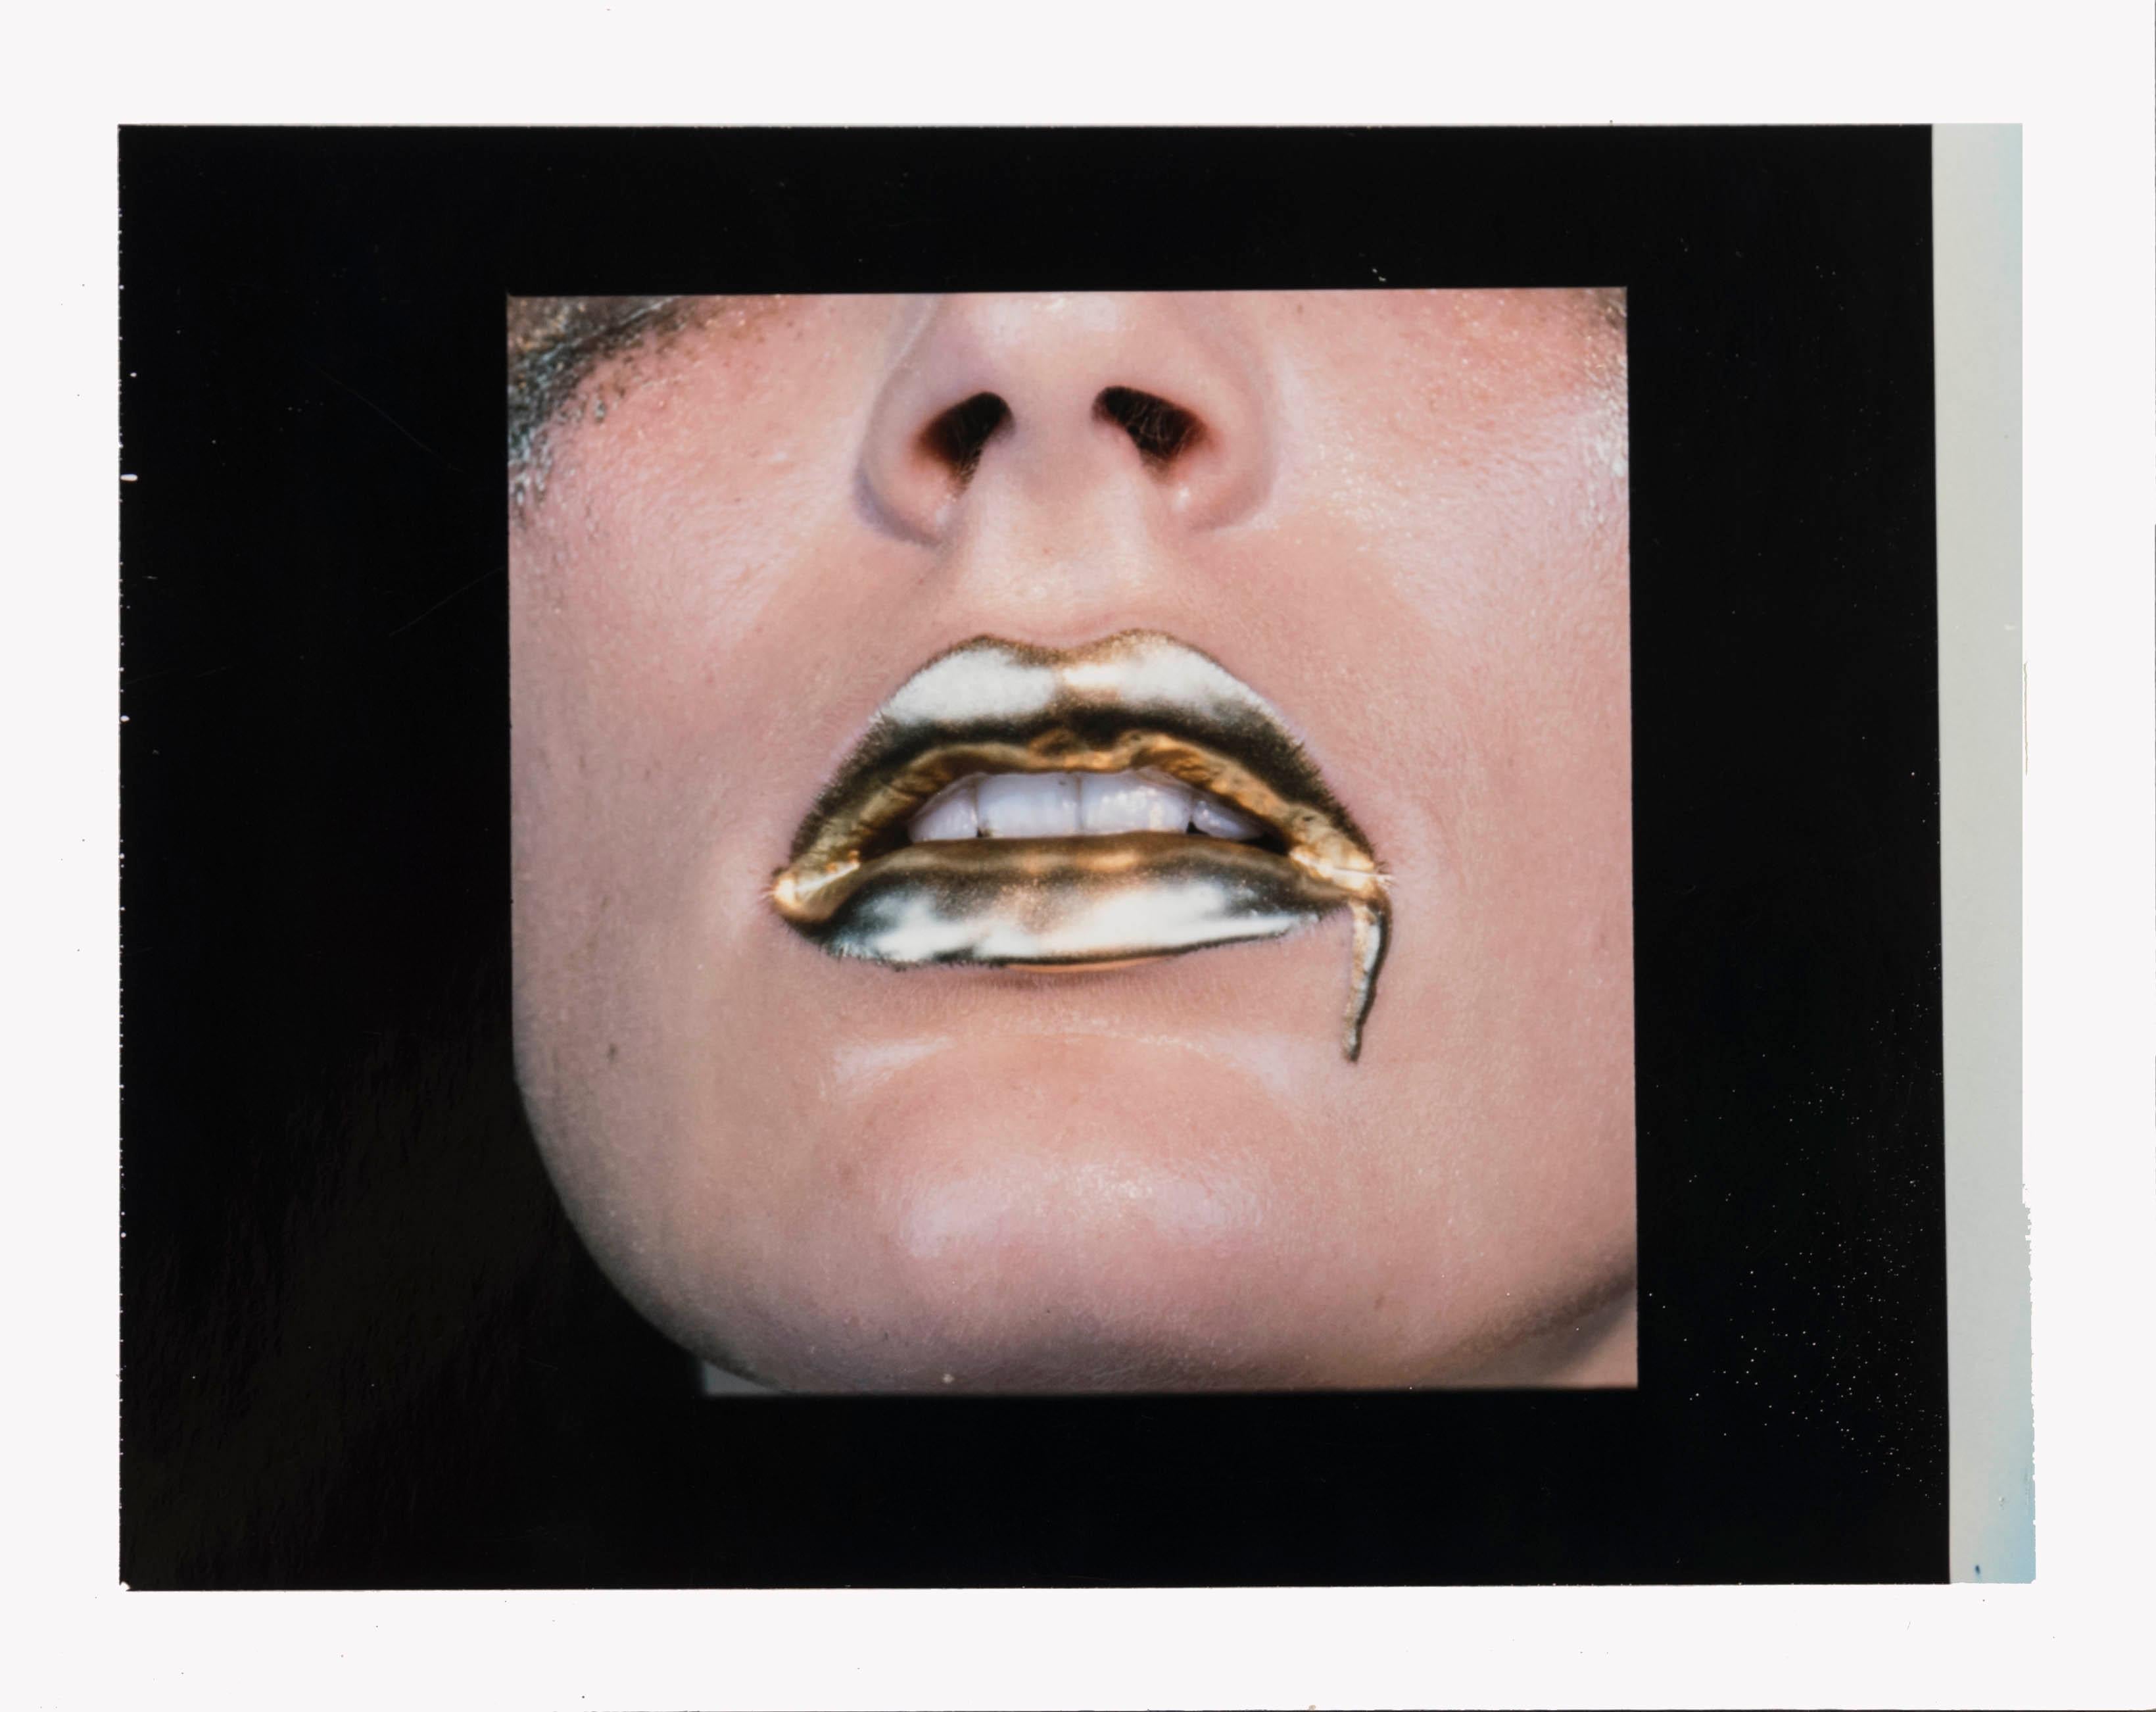 Bold Gold - study IV 2006 - Miles Aldridge (Colour Photography)
Unique Polaroid print
Signed in ink on reverse
3 1/2 x 4 1/4 inches

Miles Aldridge (born 1964) is one of Britain’s most celebrated fashion photographers, who has worked for a number of